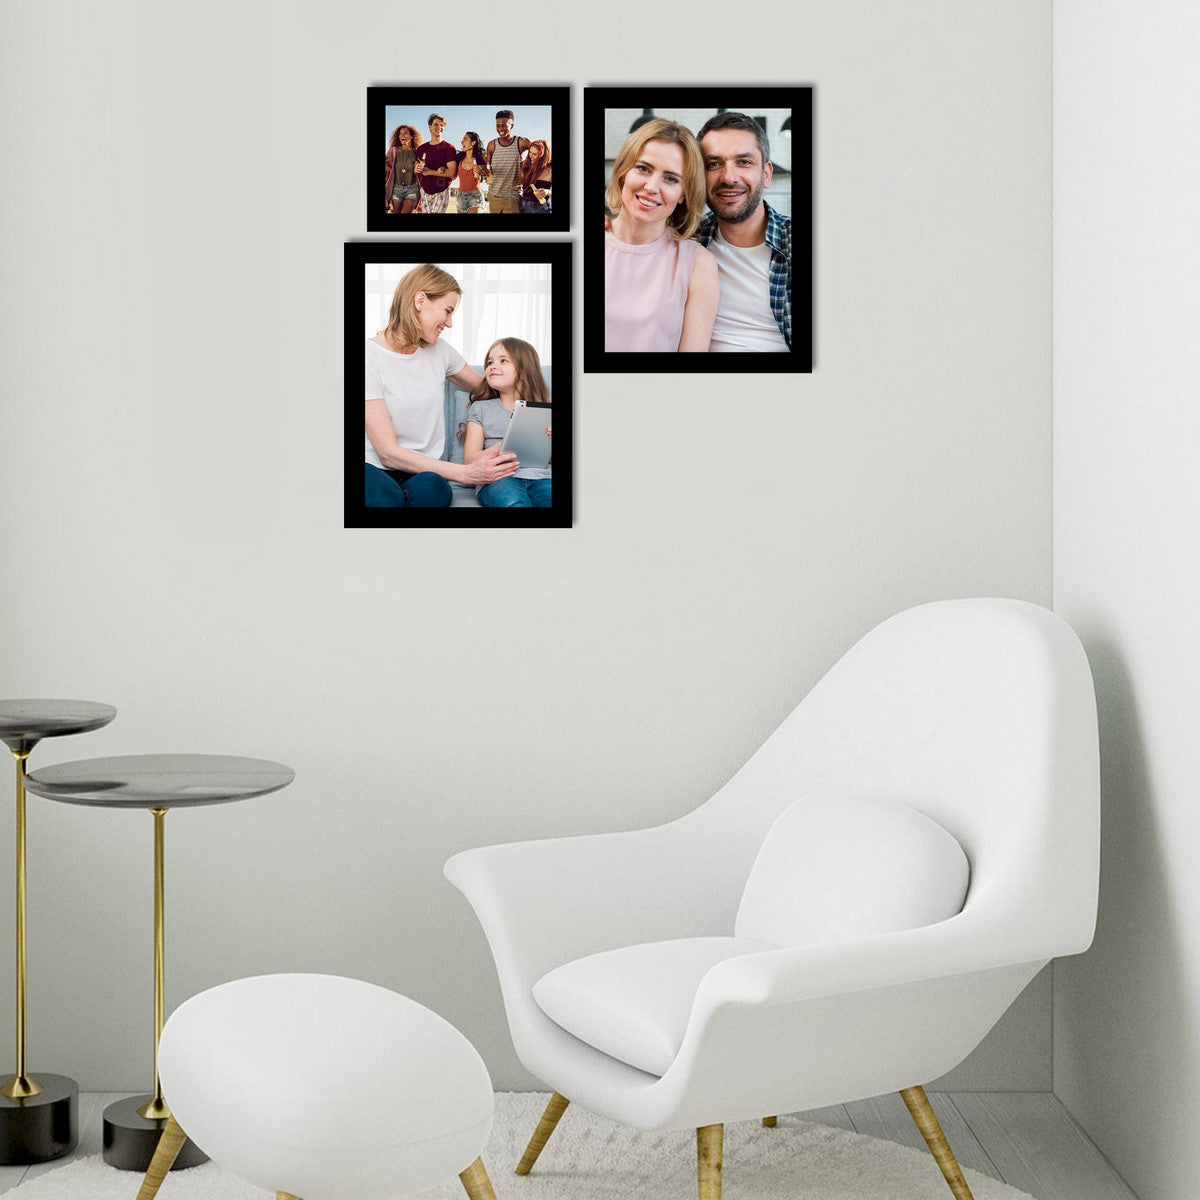 Memory Wall Collage Photo Frame - Set of 3 Photo Frames for 1 Photo of 5"x7" and 2 Photos of 8"x10" 2